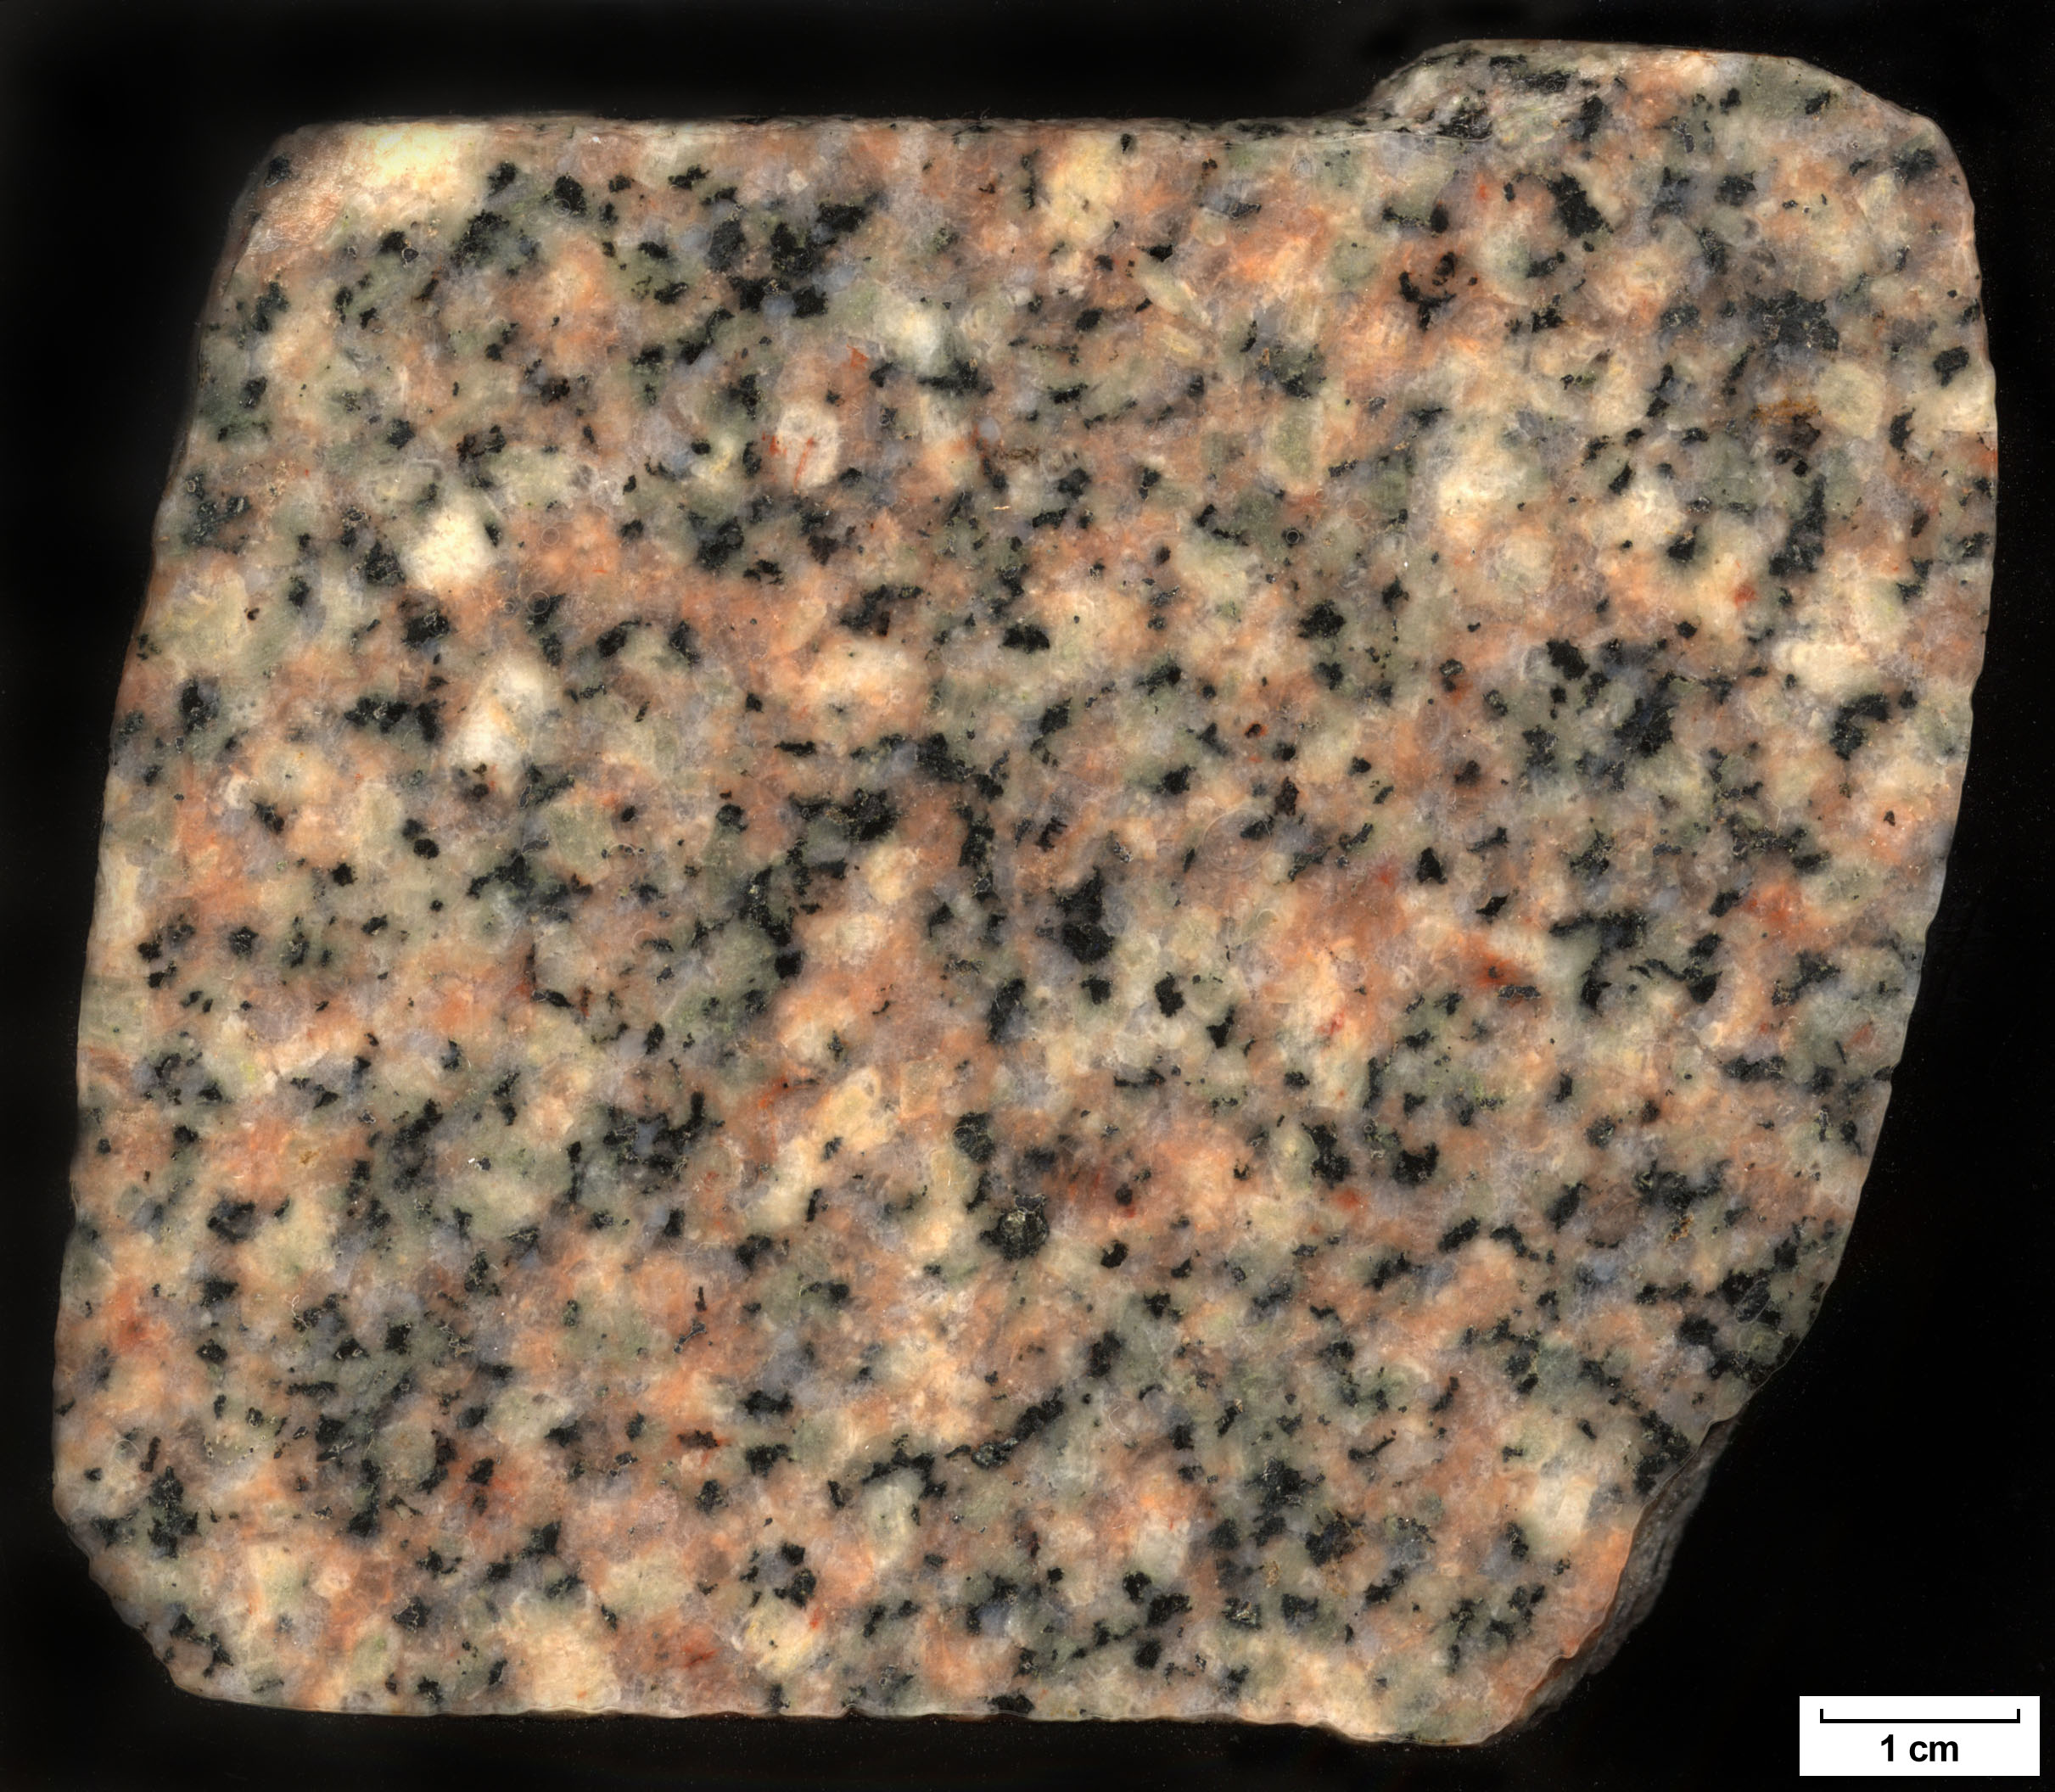 Solid, opaque, square shaped, smooth sided rock with specs of pink, black, gray, and cream particles